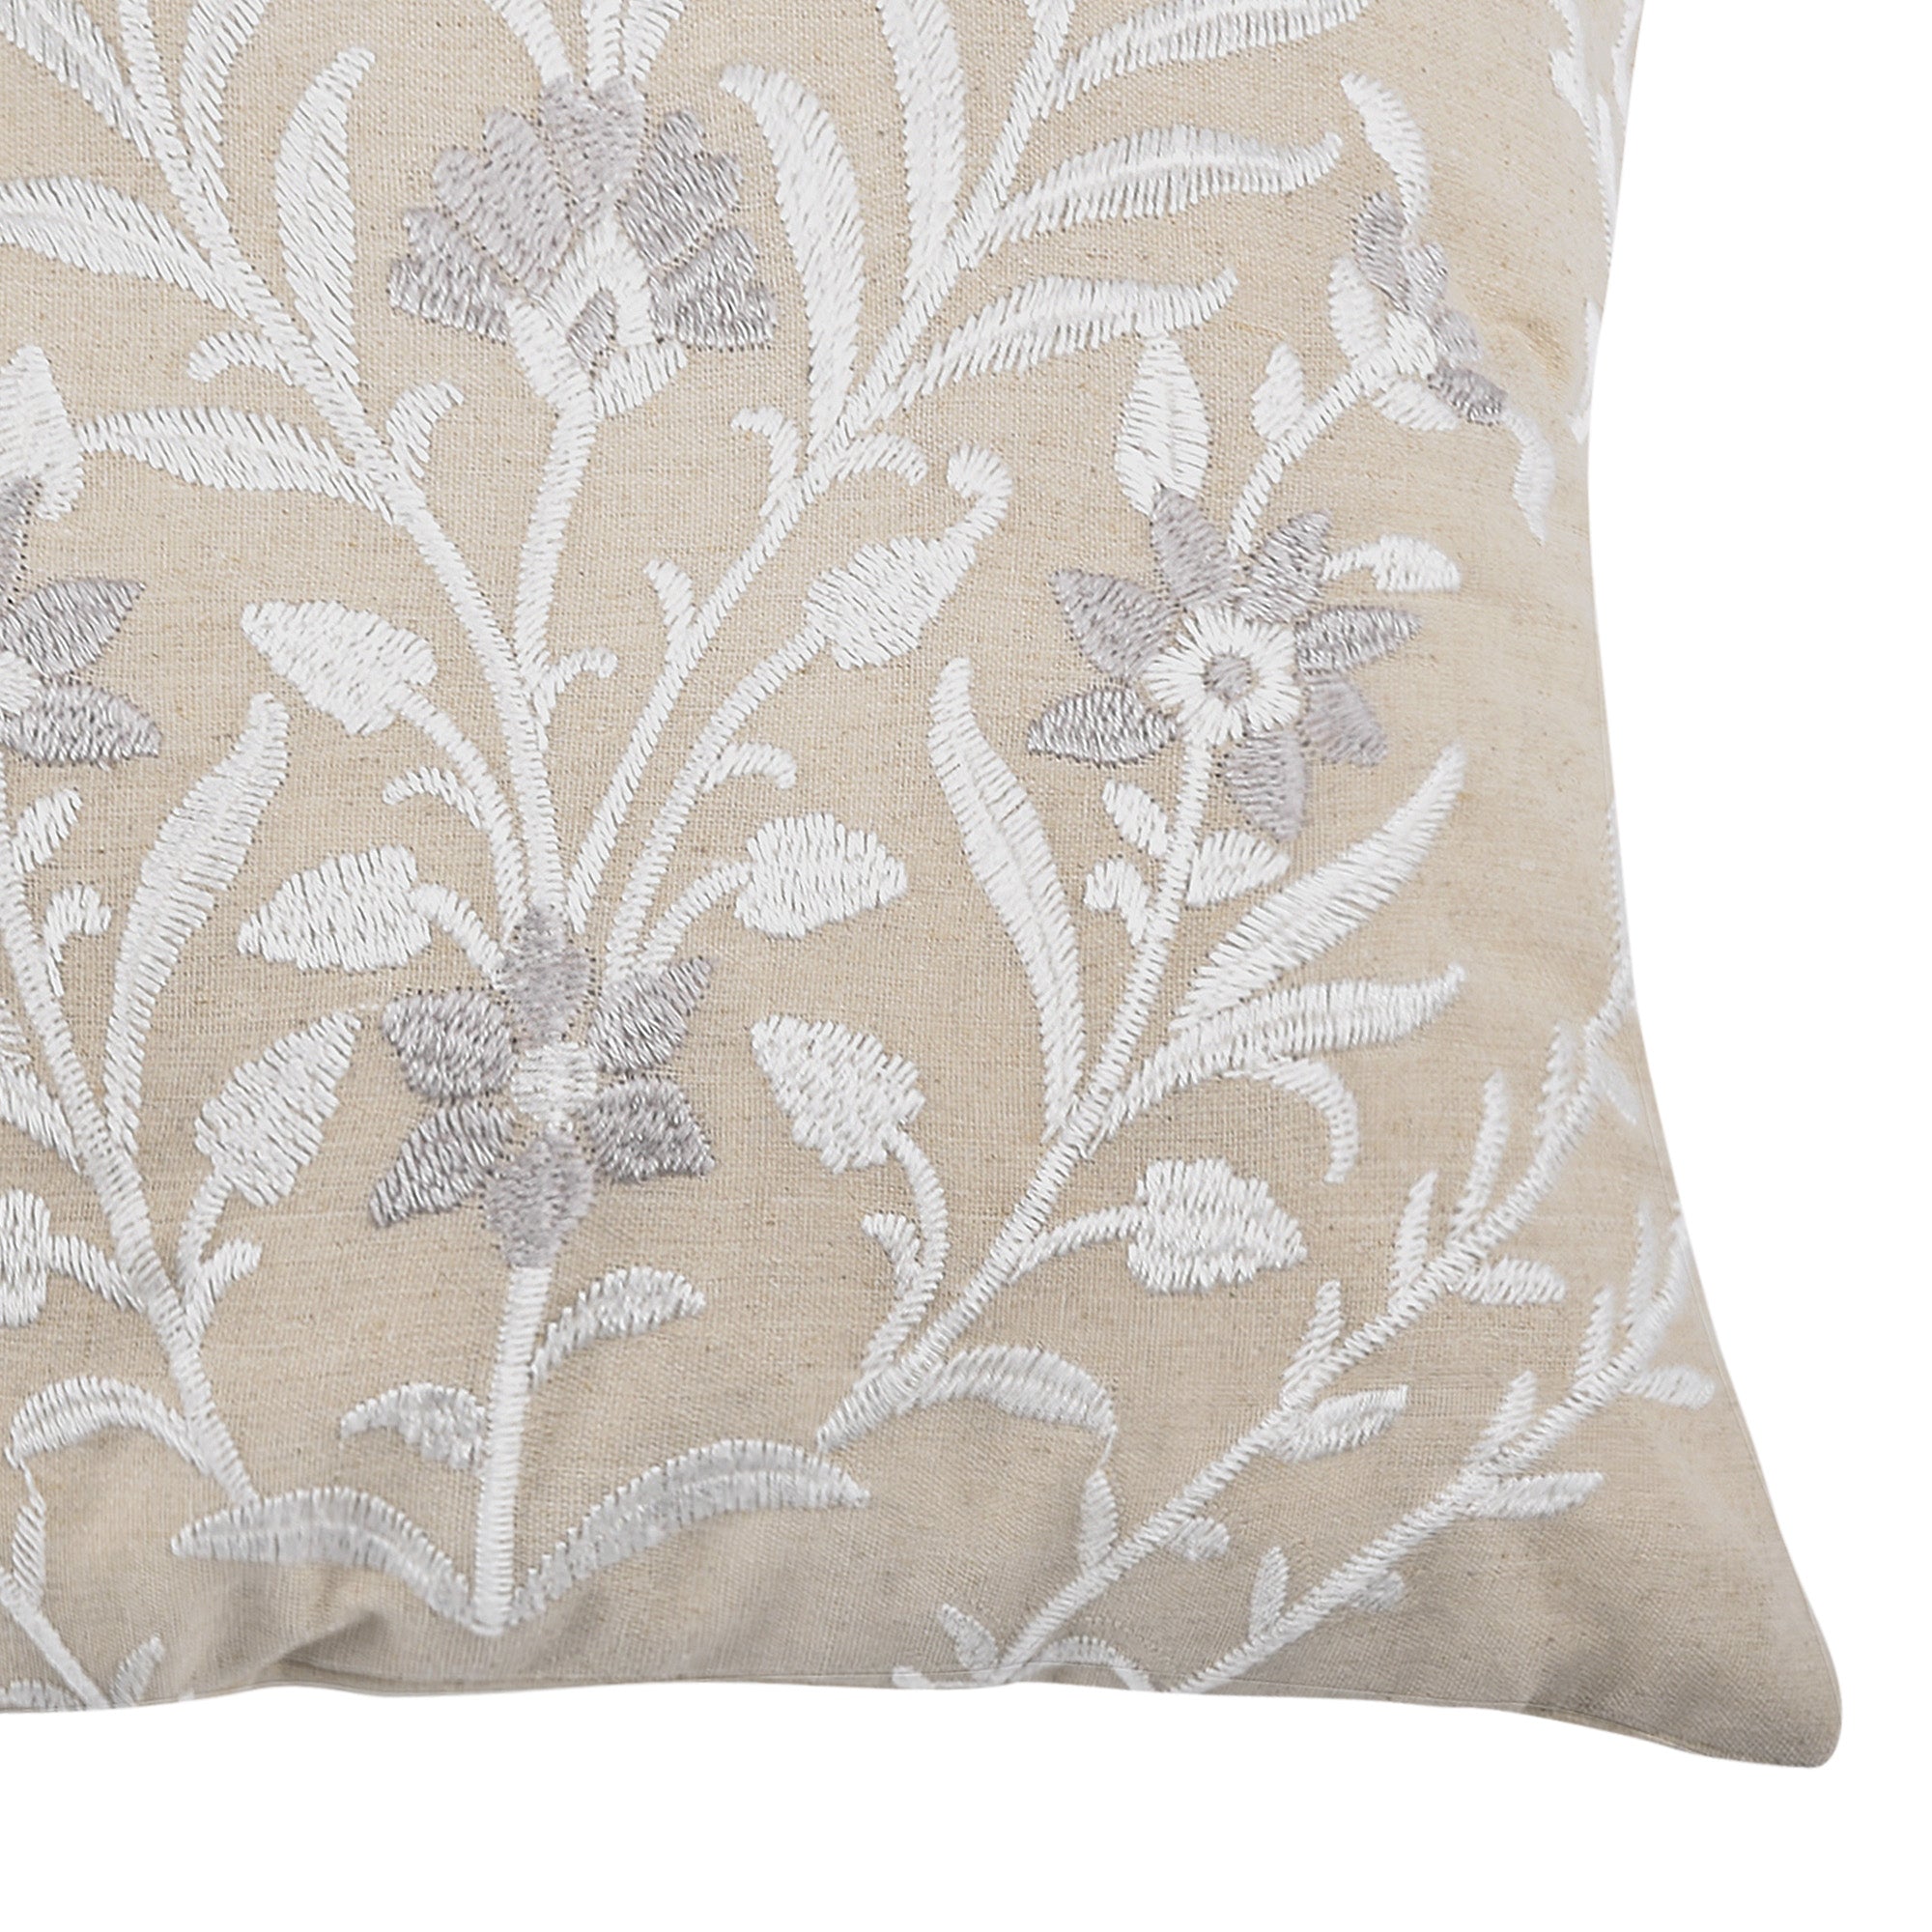 Eyelet Embroidered Floral Pillow